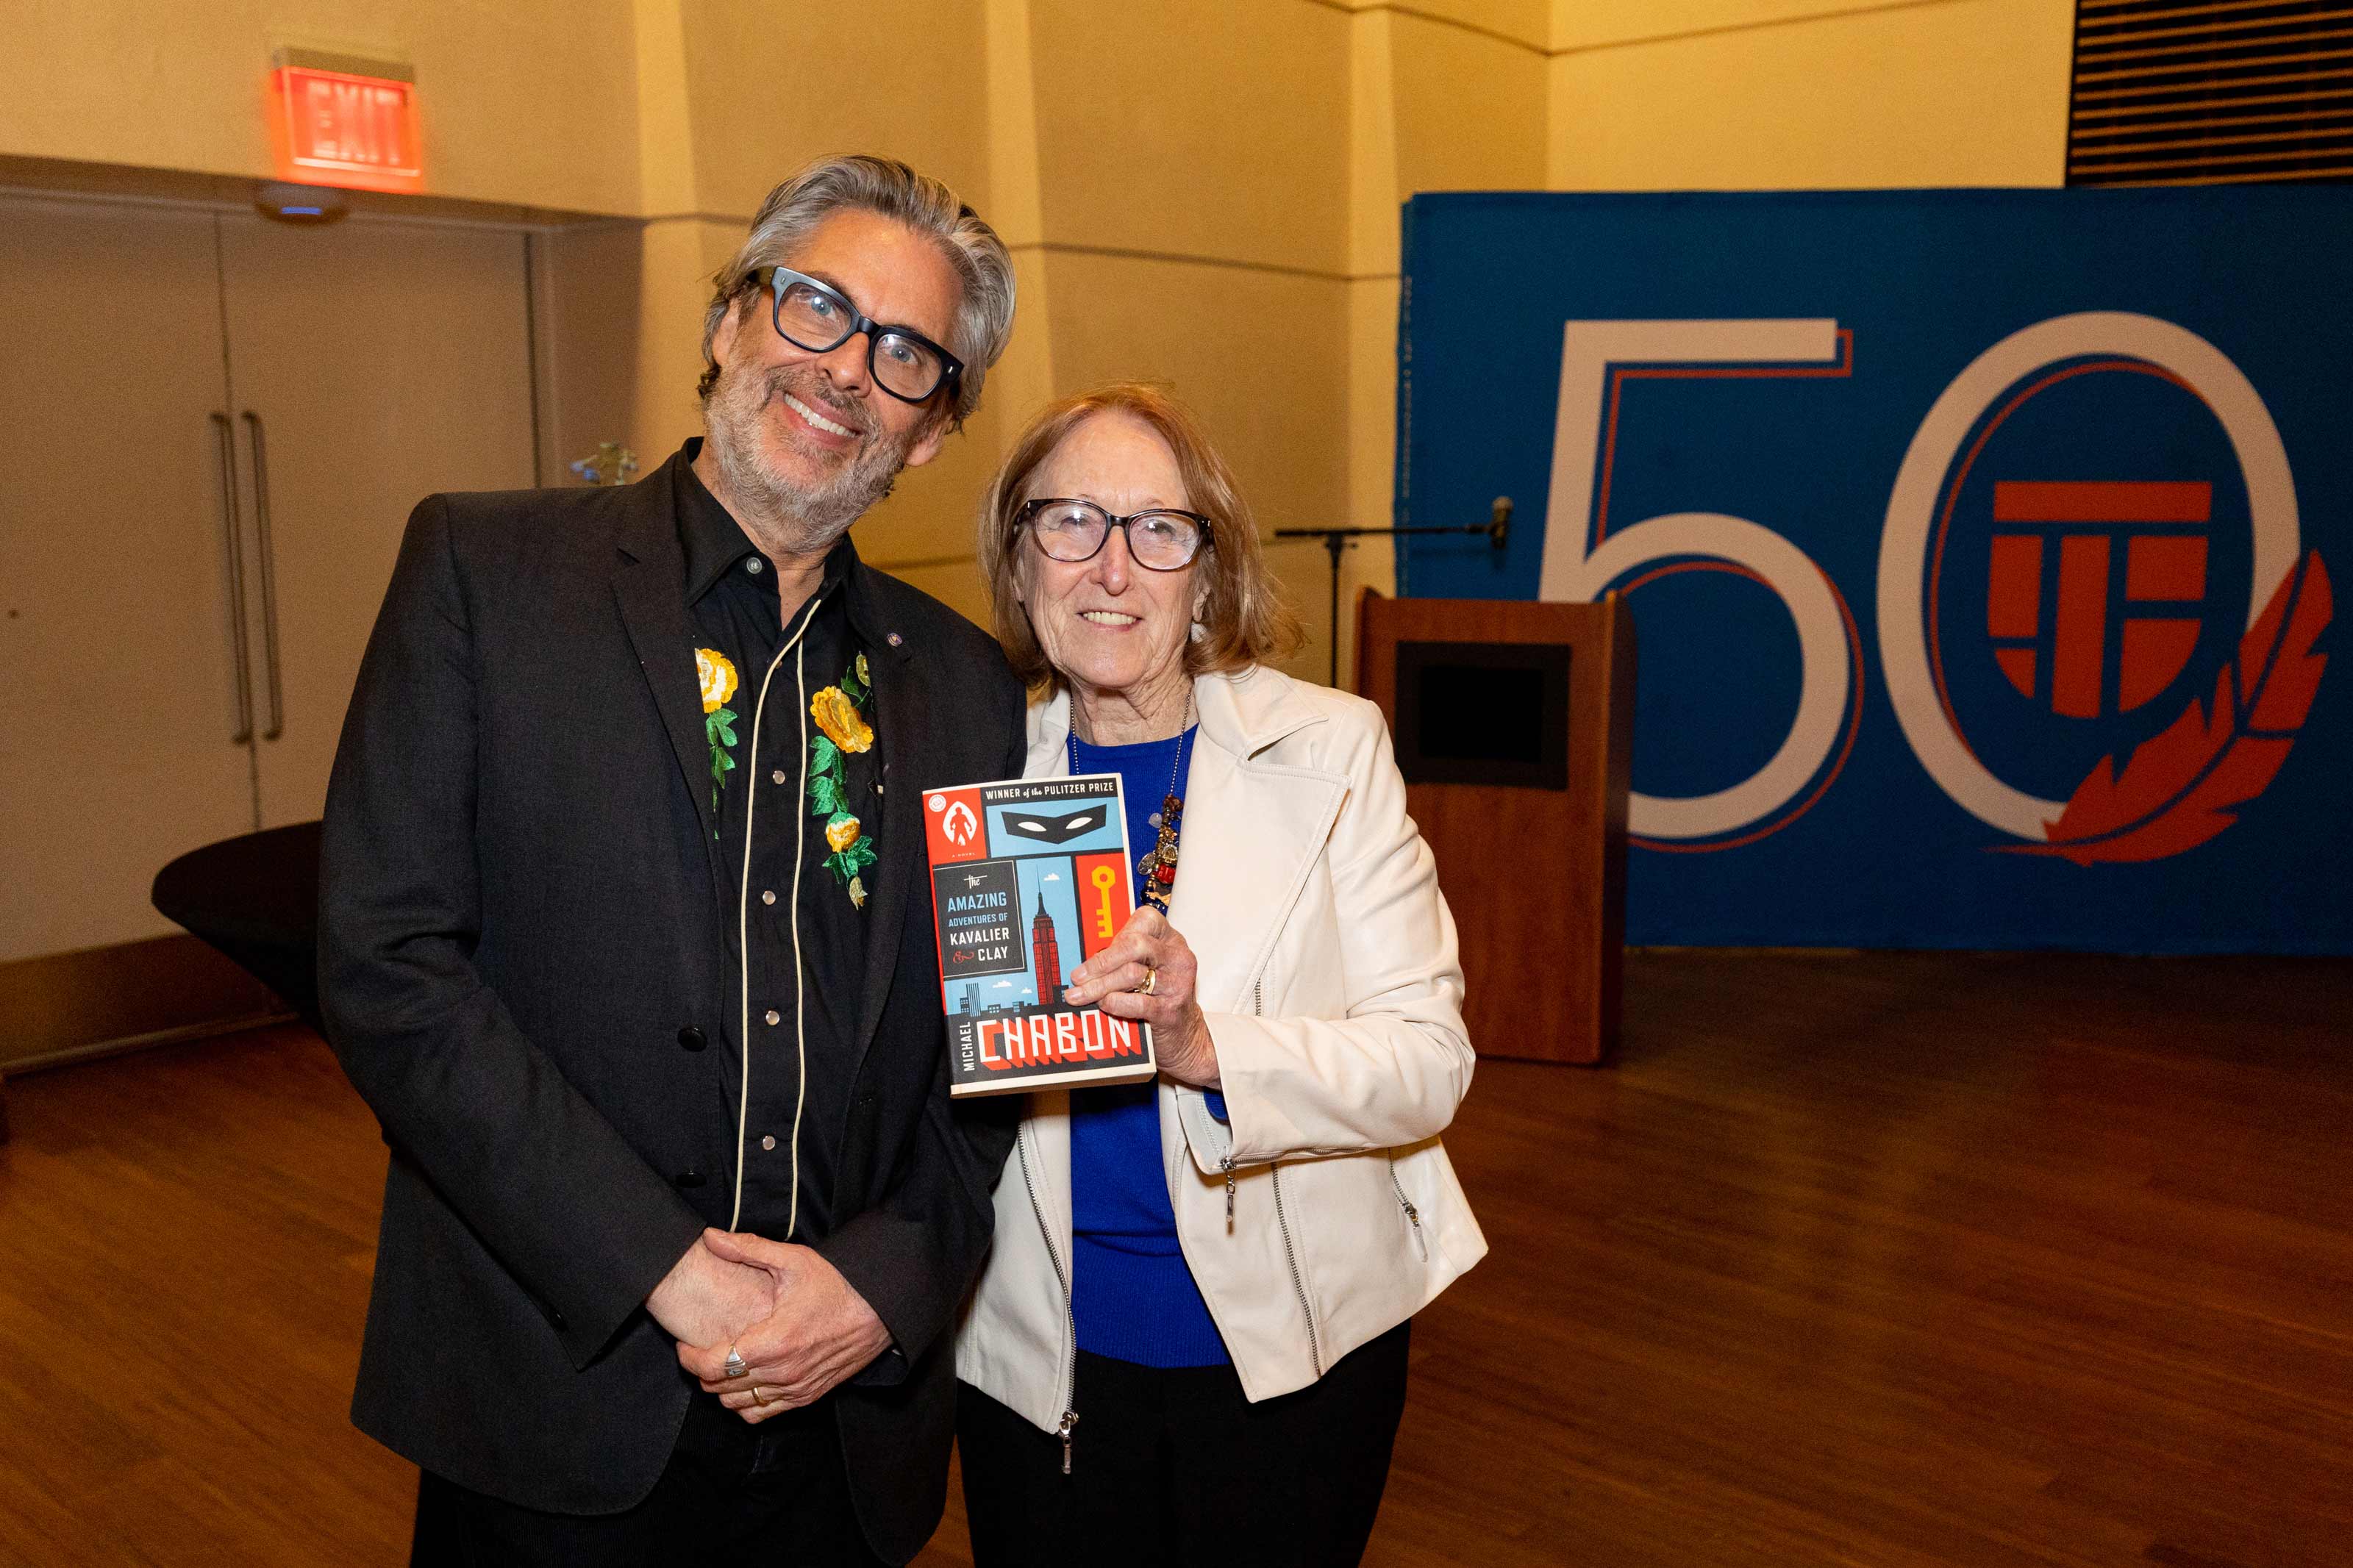 Michael Chabon with guest at Distinguished Lecture Series